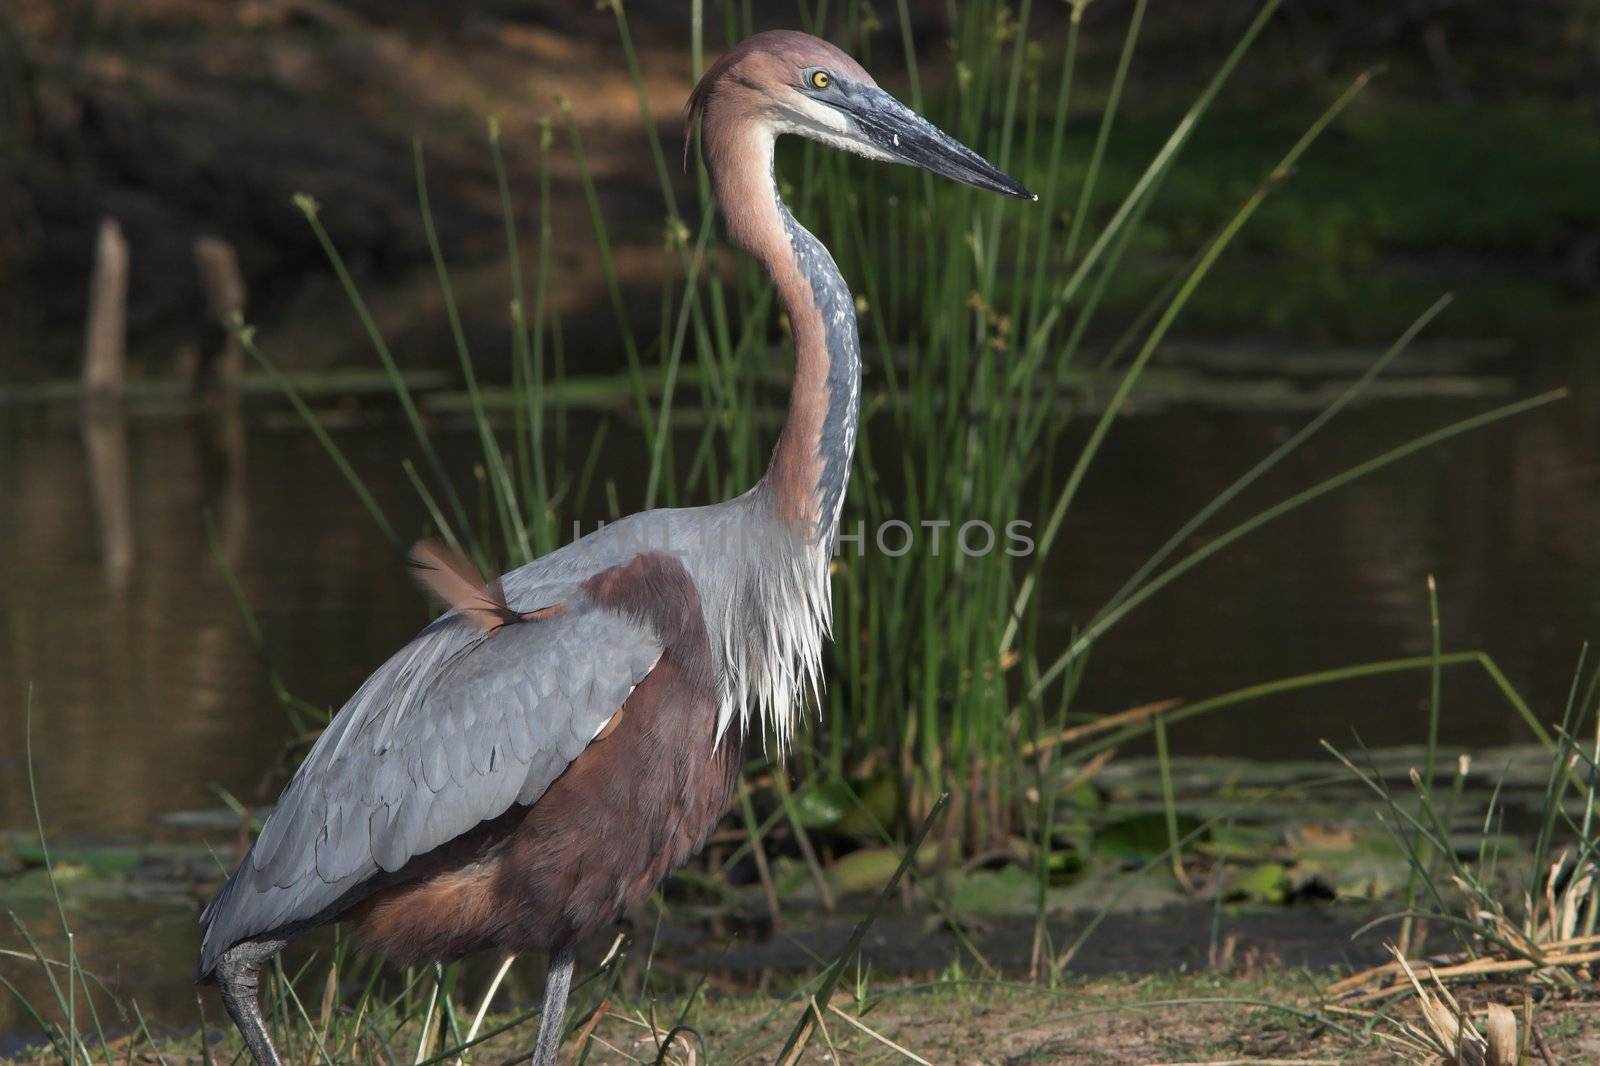 Goliath heron side profile with a misplaced feather